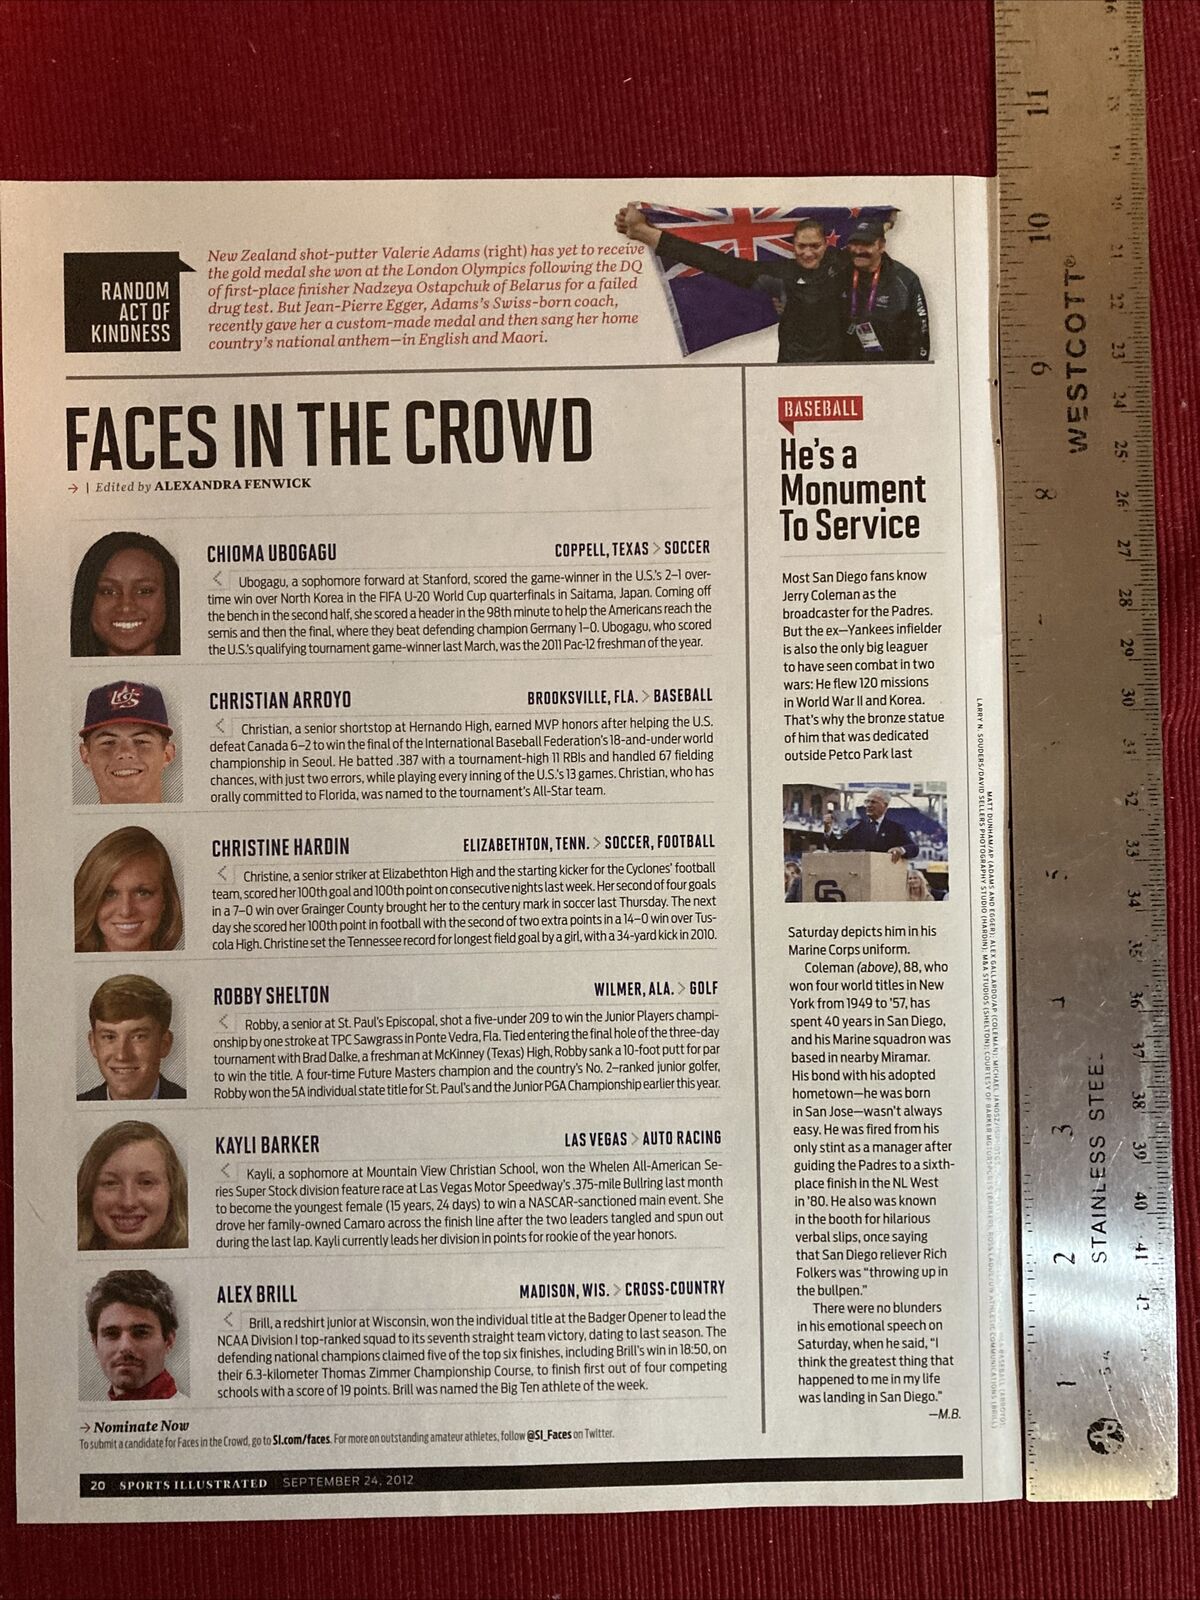 Christian Arroyo Faces In The Crowd 1st Article 2012 Print Ad - Great To frame